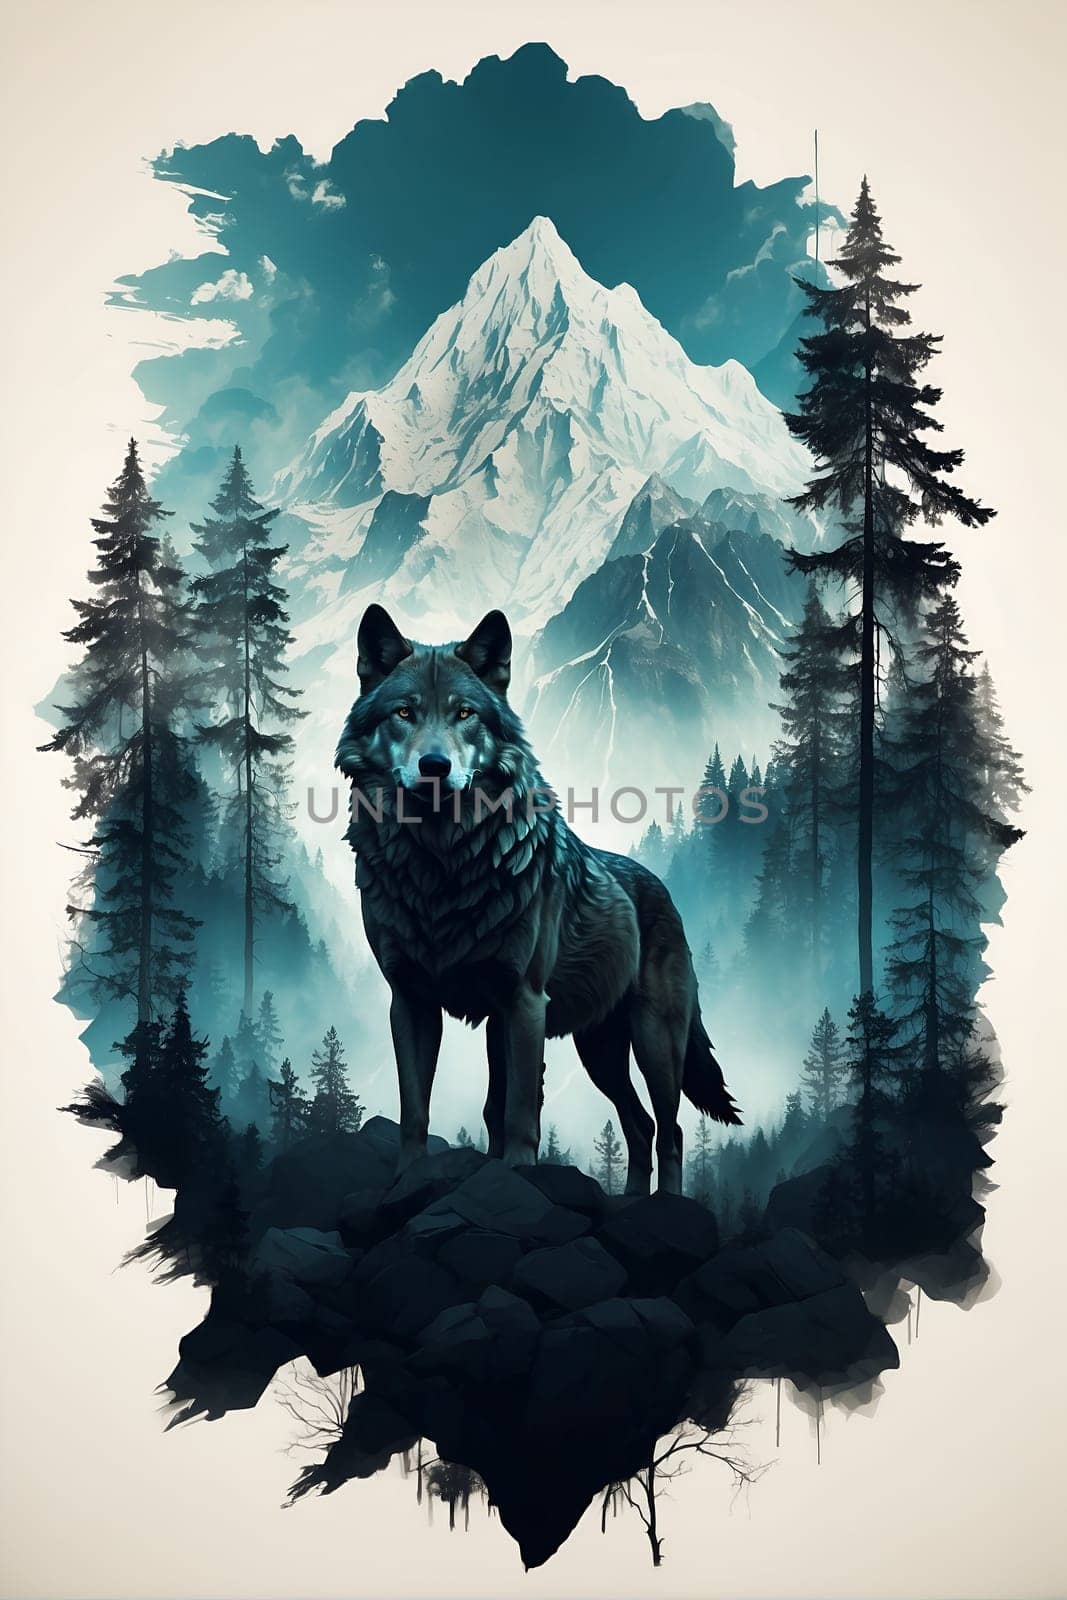 A powerful and commanding wolf stands amidst the dense serenity of the forest.